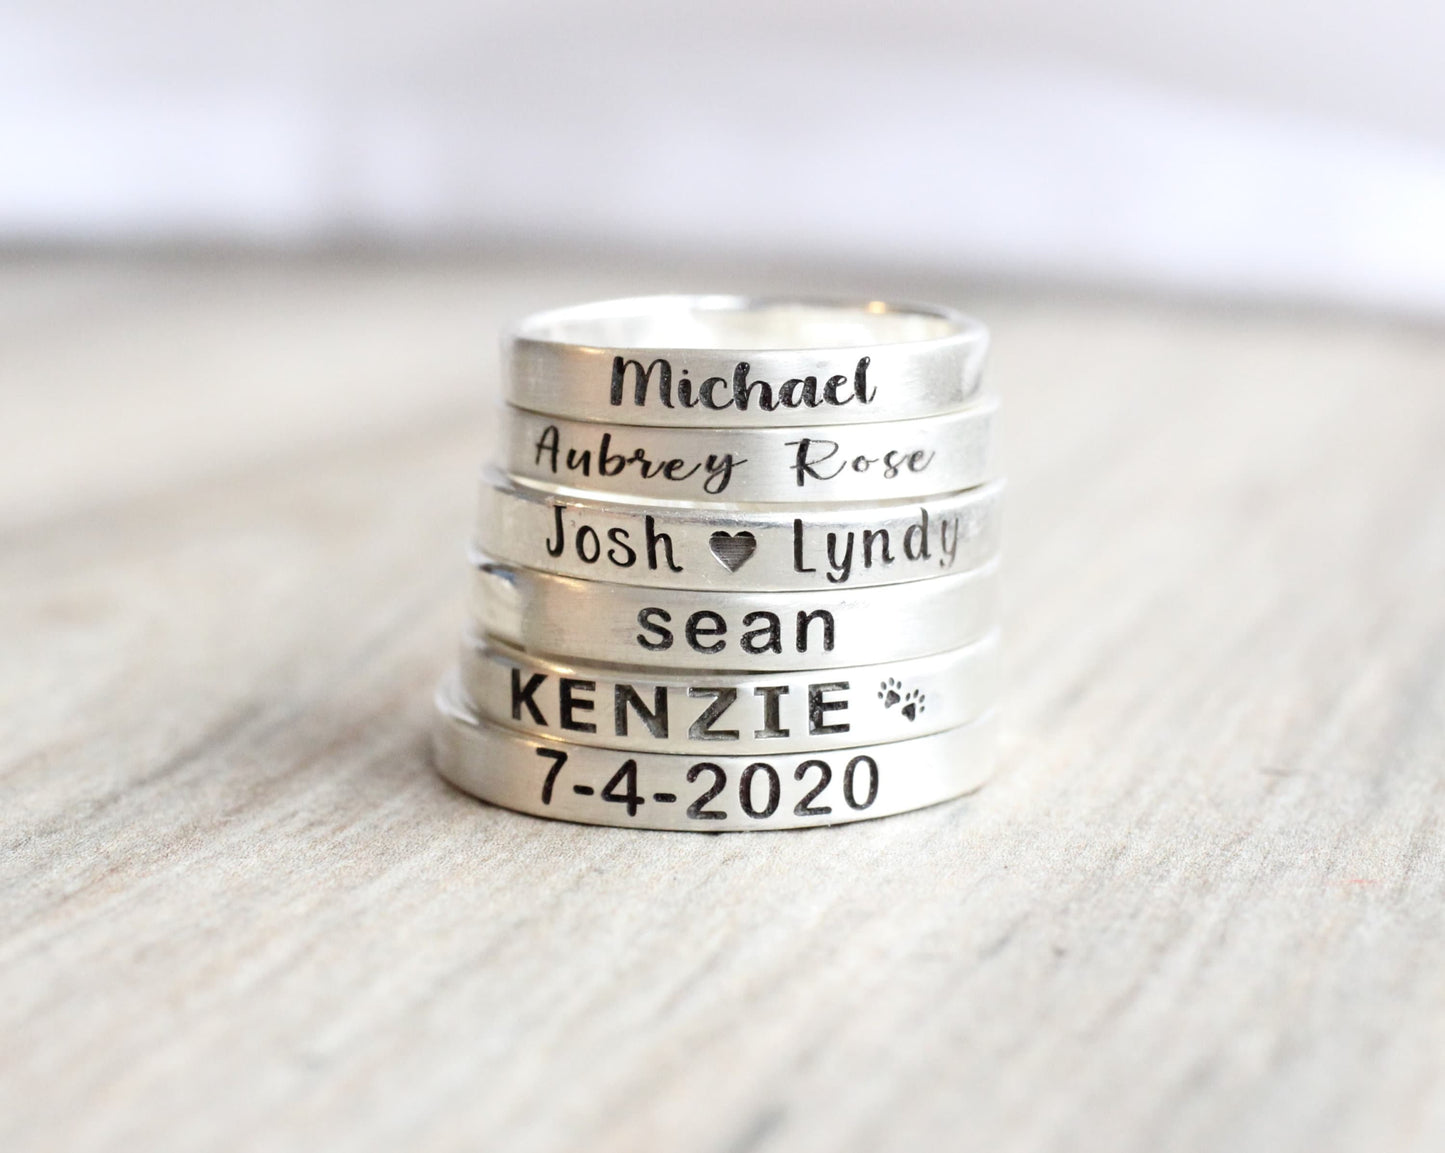 Sterling Silver Personalized Ring